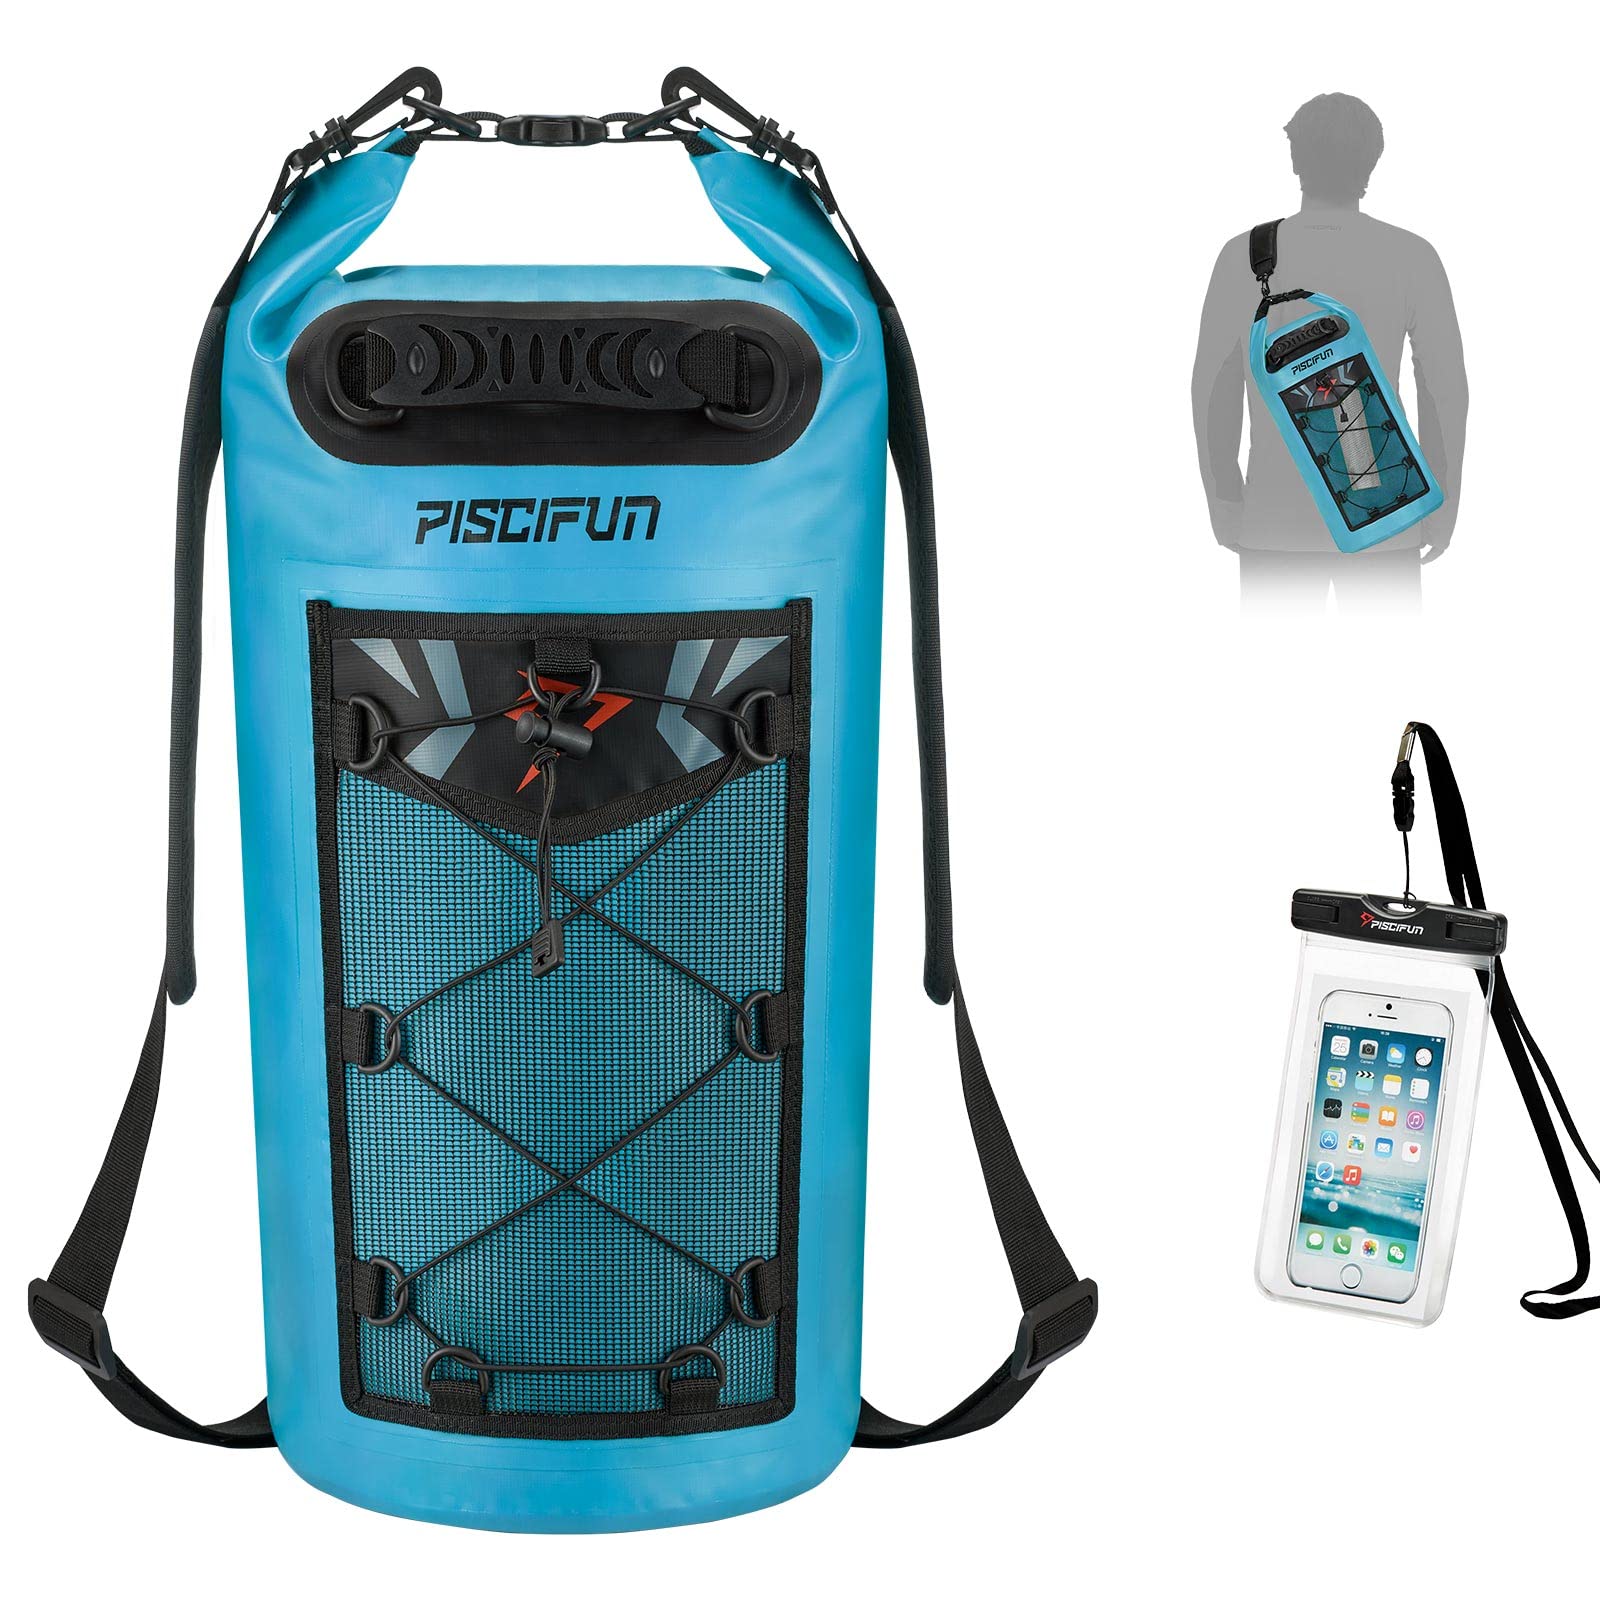 Piscifun Dry Bag, Waterproof Floating Backpack 5L/10L/20L/30L/40L, with Waterproof Phone Case for Kayking, Boating, Kayaking, Surfing, Rafting and fishing